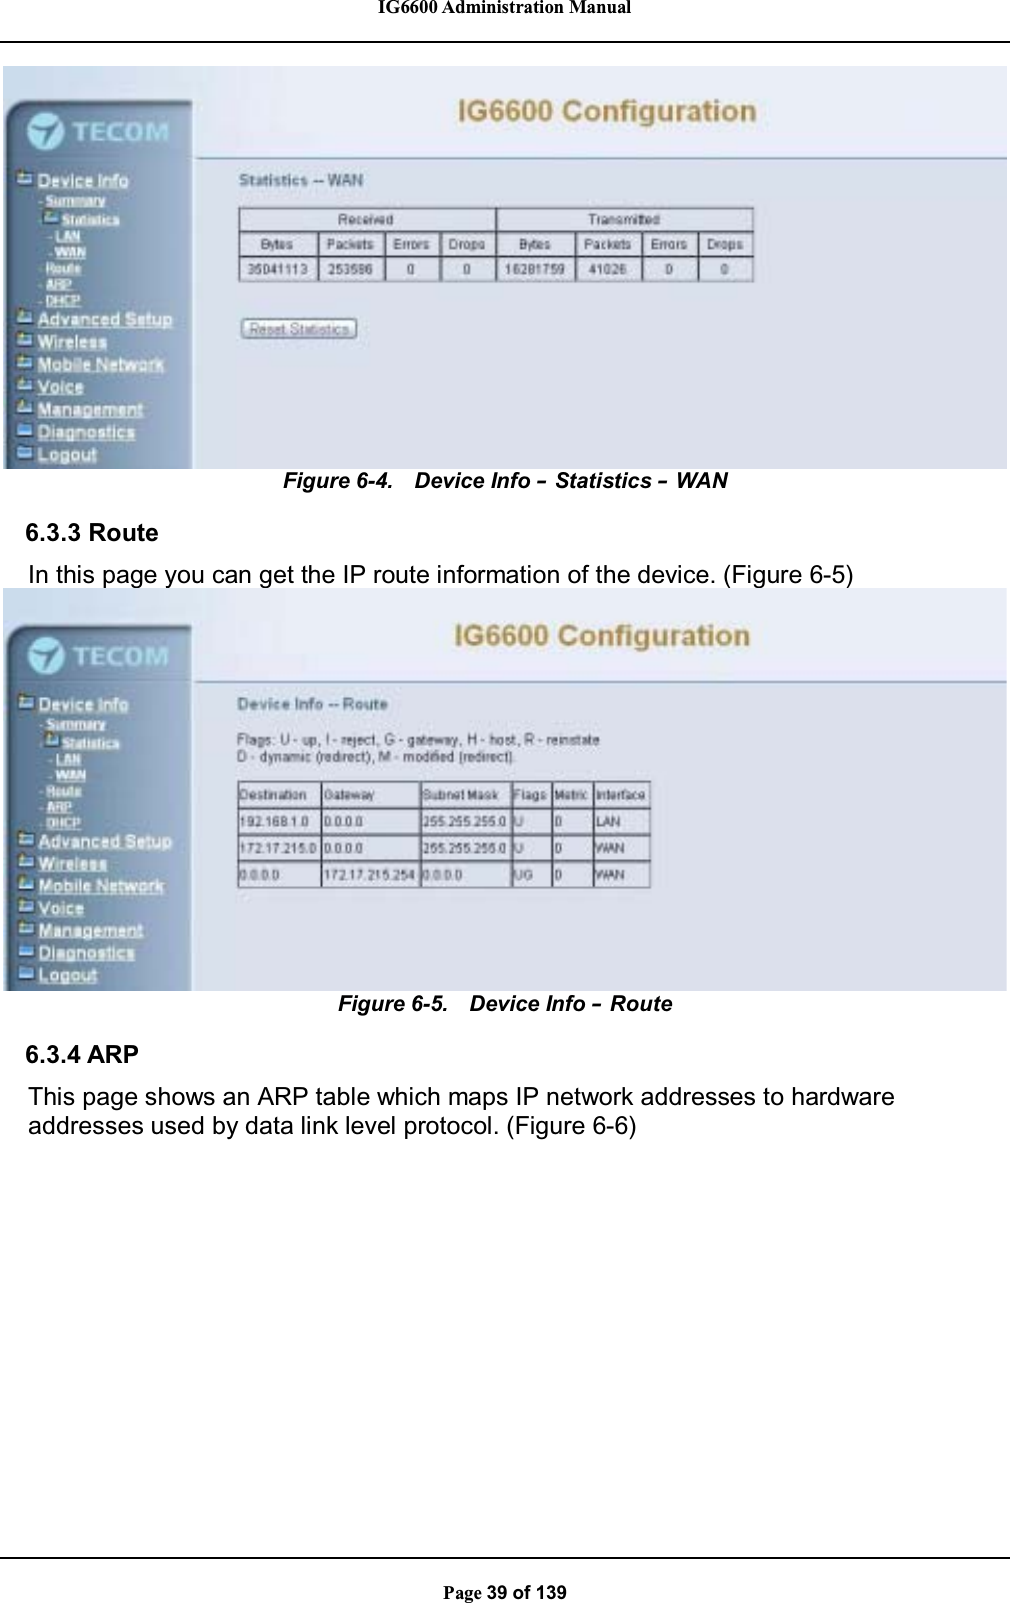 IG6600 Administration ManualPage 39 of 139Figure 6-4. Device Info –Statistics –WAN6.3.3 RouteIn this page you can get the IP route information of the device. (Figure 6-5)Figure 6-5. Device Info –Route6.3.4 ARPThis page shows an ARP table which maps IP network addresses to hardwareaddresses used by data link level protocol. (Figure 6-6)